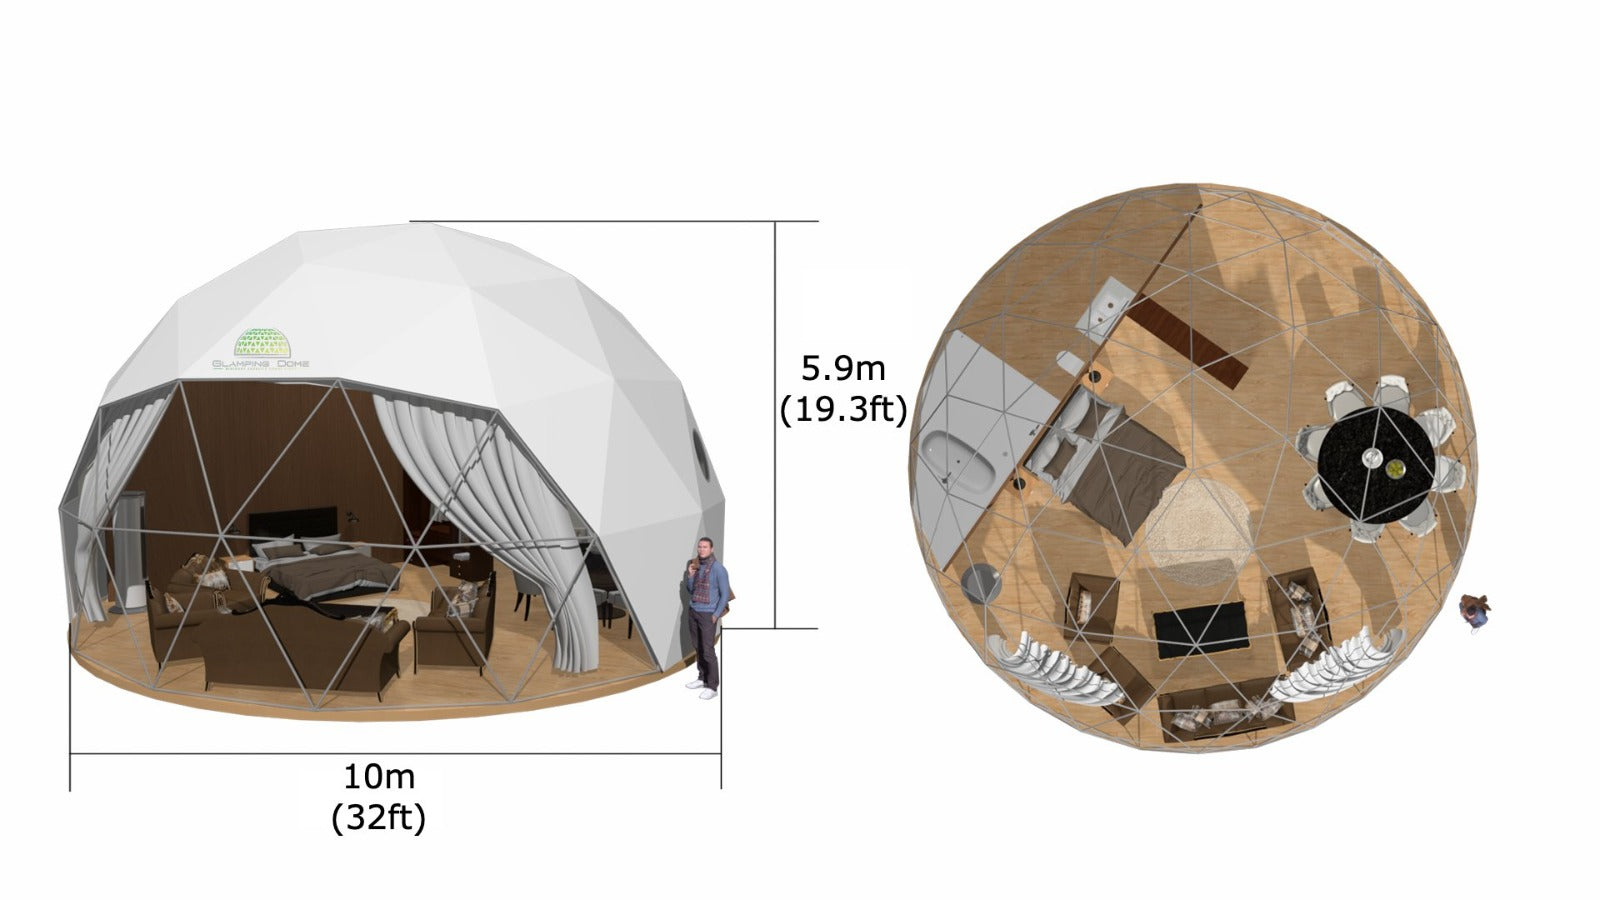 23ft 10m geodesic glamping dome tent